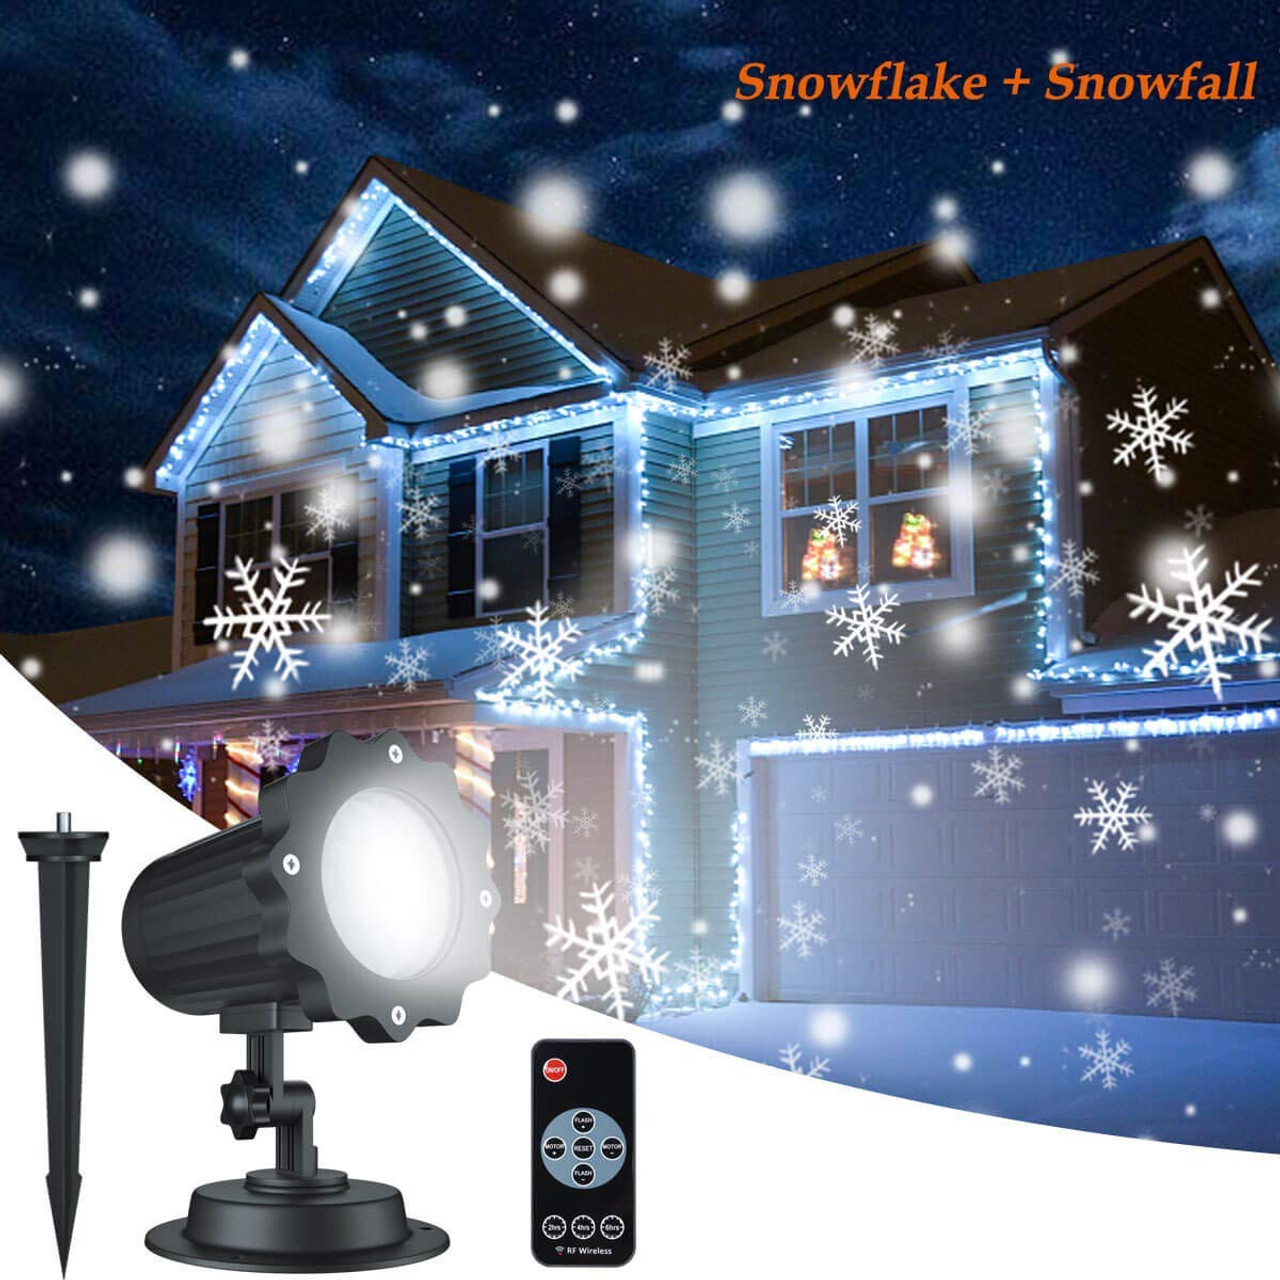 https://cdn11.bigcommerce.com/s-kwuh809851/images/stencil/1280x1280/products/825/4894/Christmas-Snowflake-Projector-Light__31564.1542810382.jpg?c=2